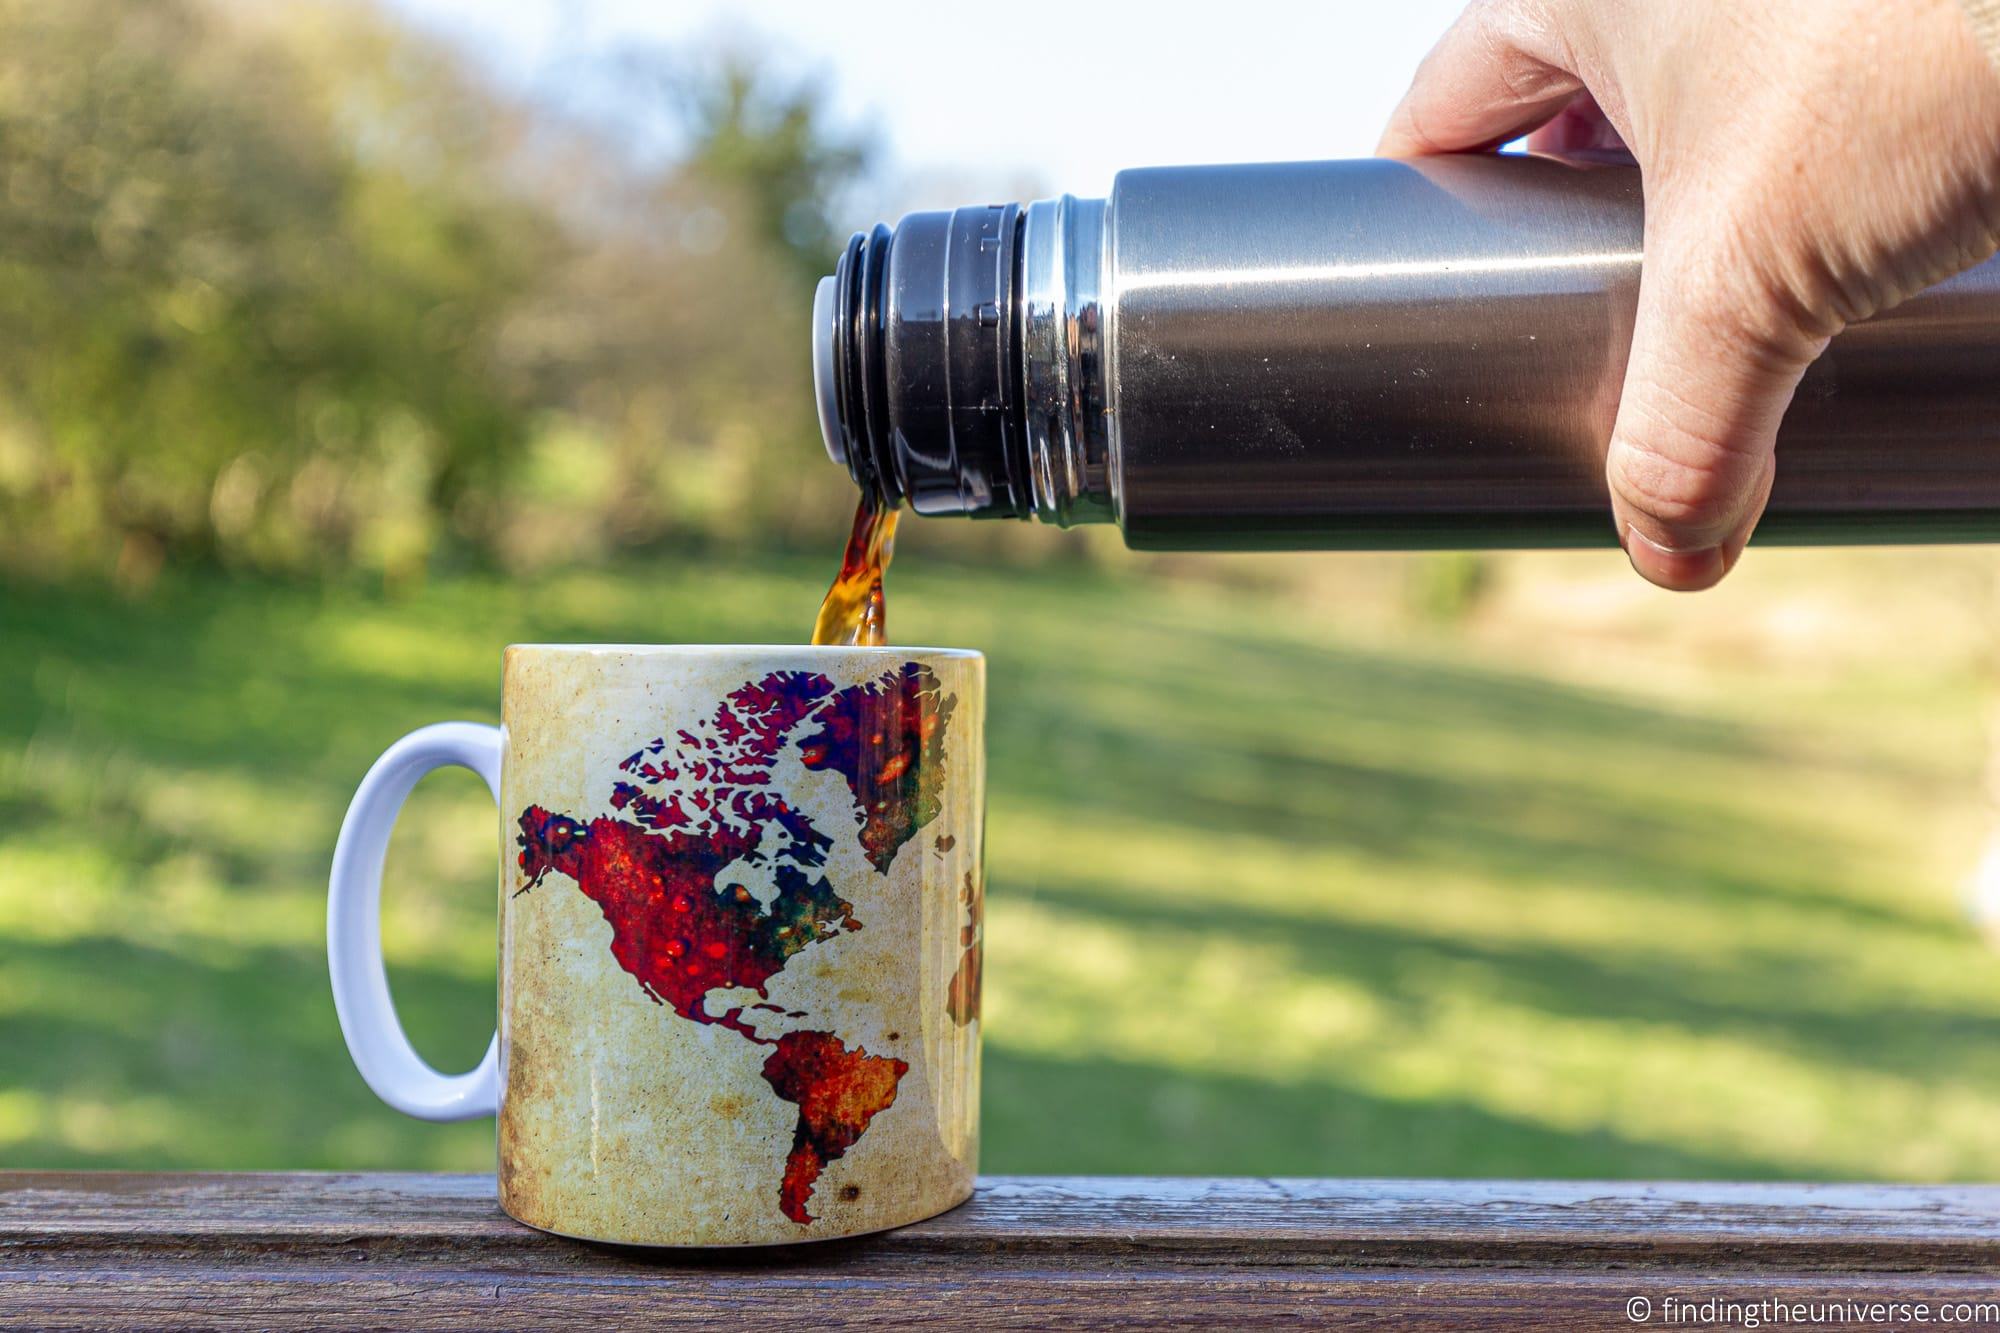 Best Portable Coffee Makers for Travel in 2023